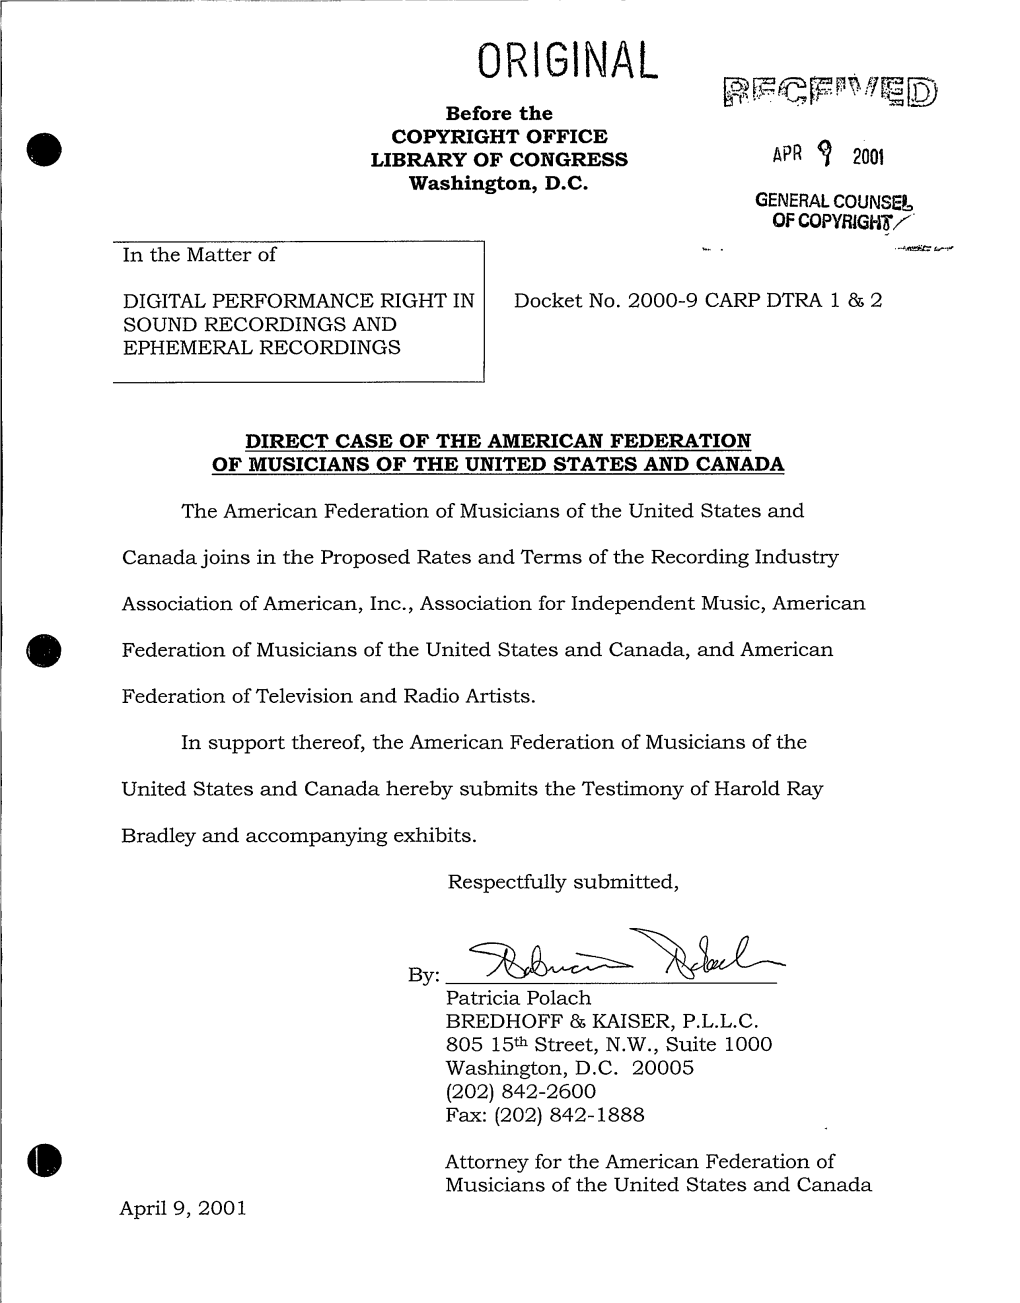 Direct Case of the American Federation of Musicians of the United States and Canada